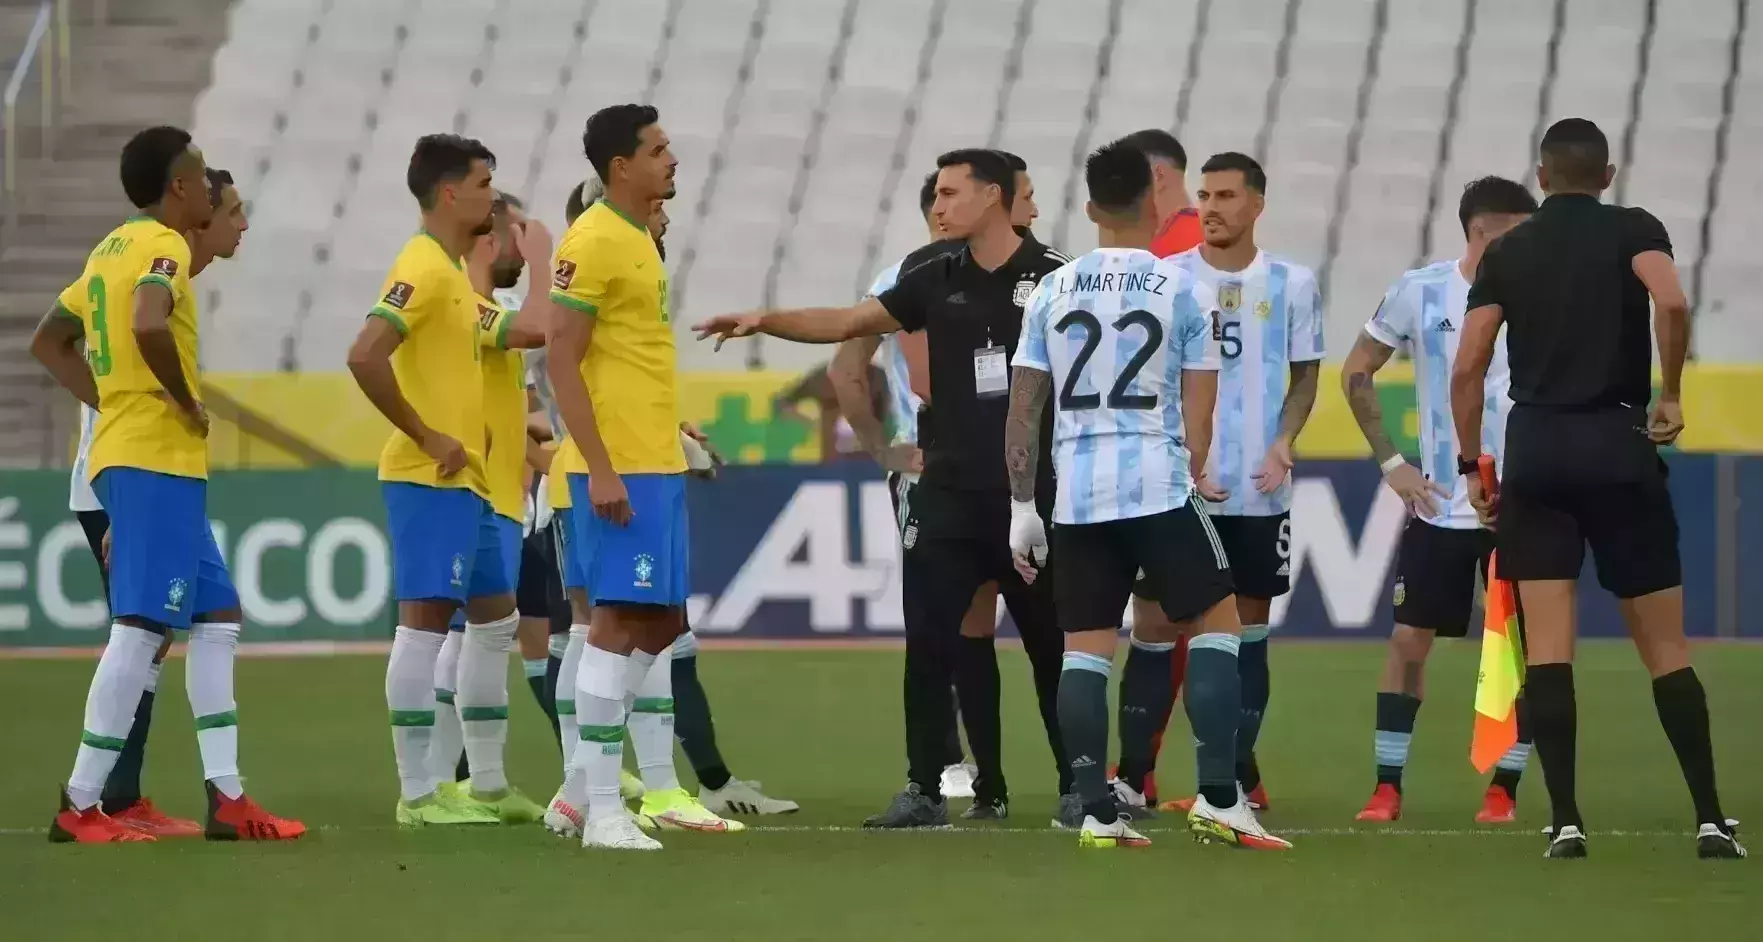 Brazil, Argentina WC football qualifier suspended amidst dramatic scene